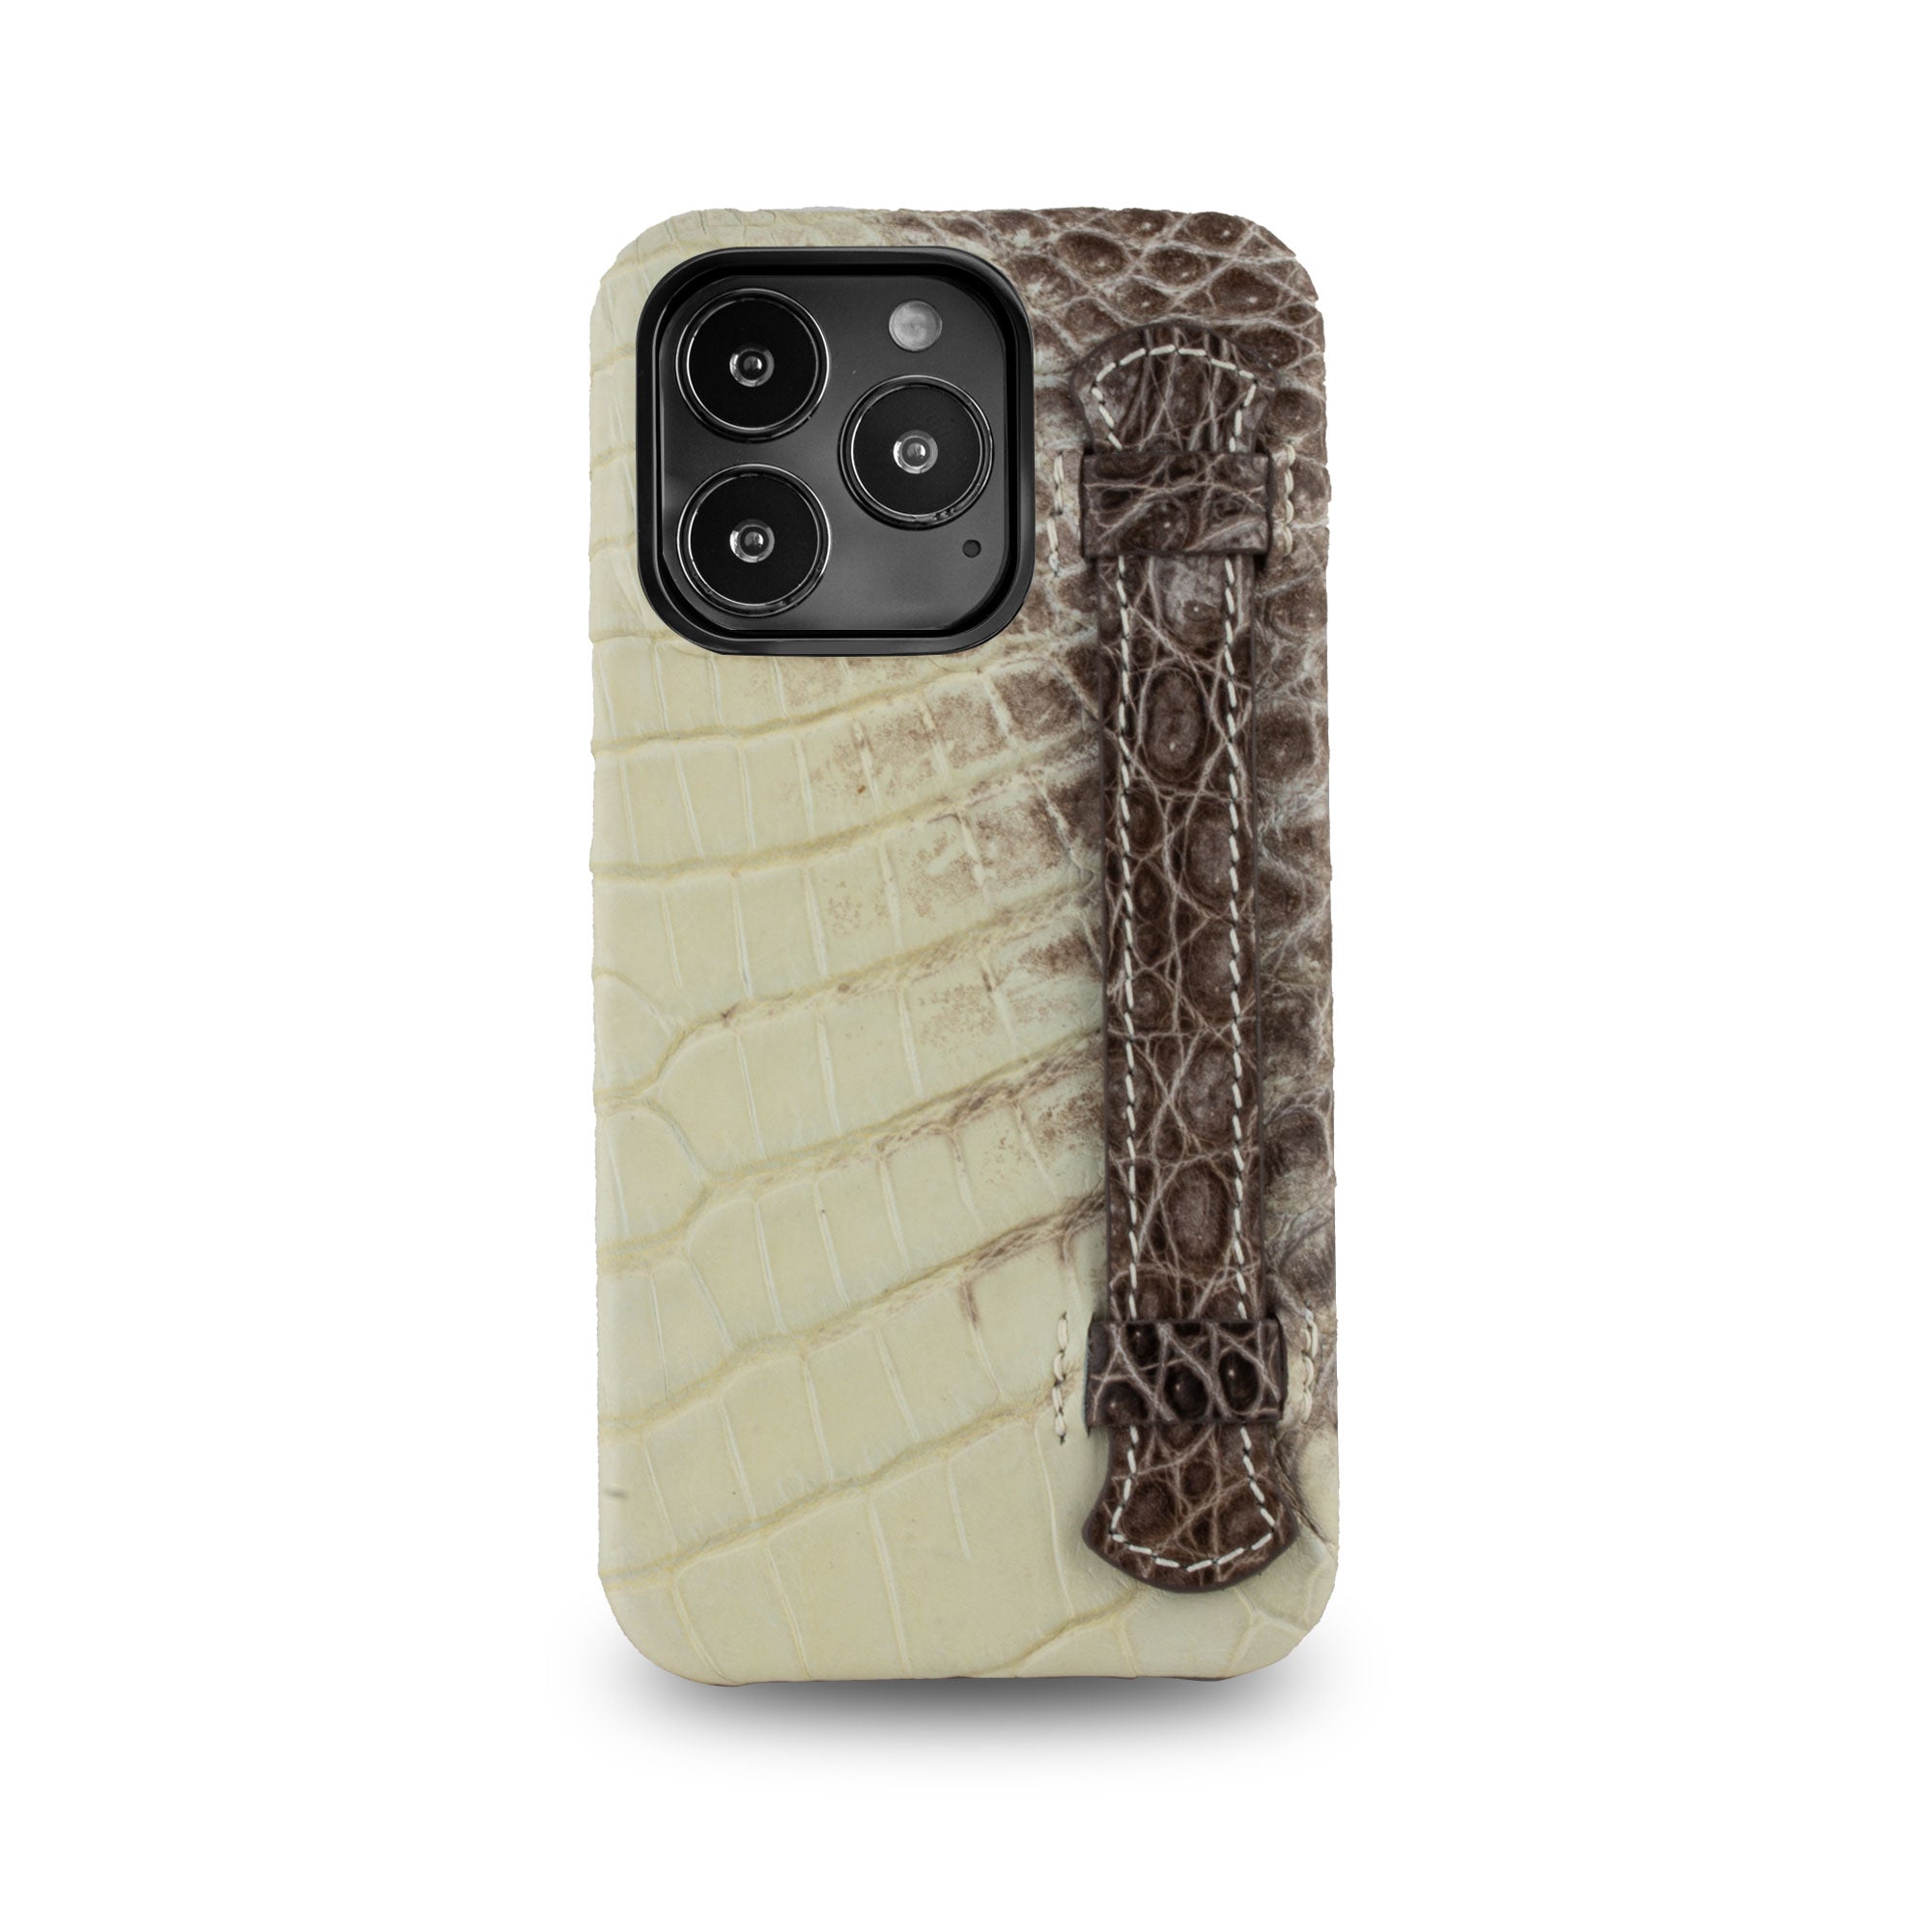 Leather iPhone HIMALAYA "Strap case" / cover - iPhone 13 ( Pro / Max ) - Genuine alligator